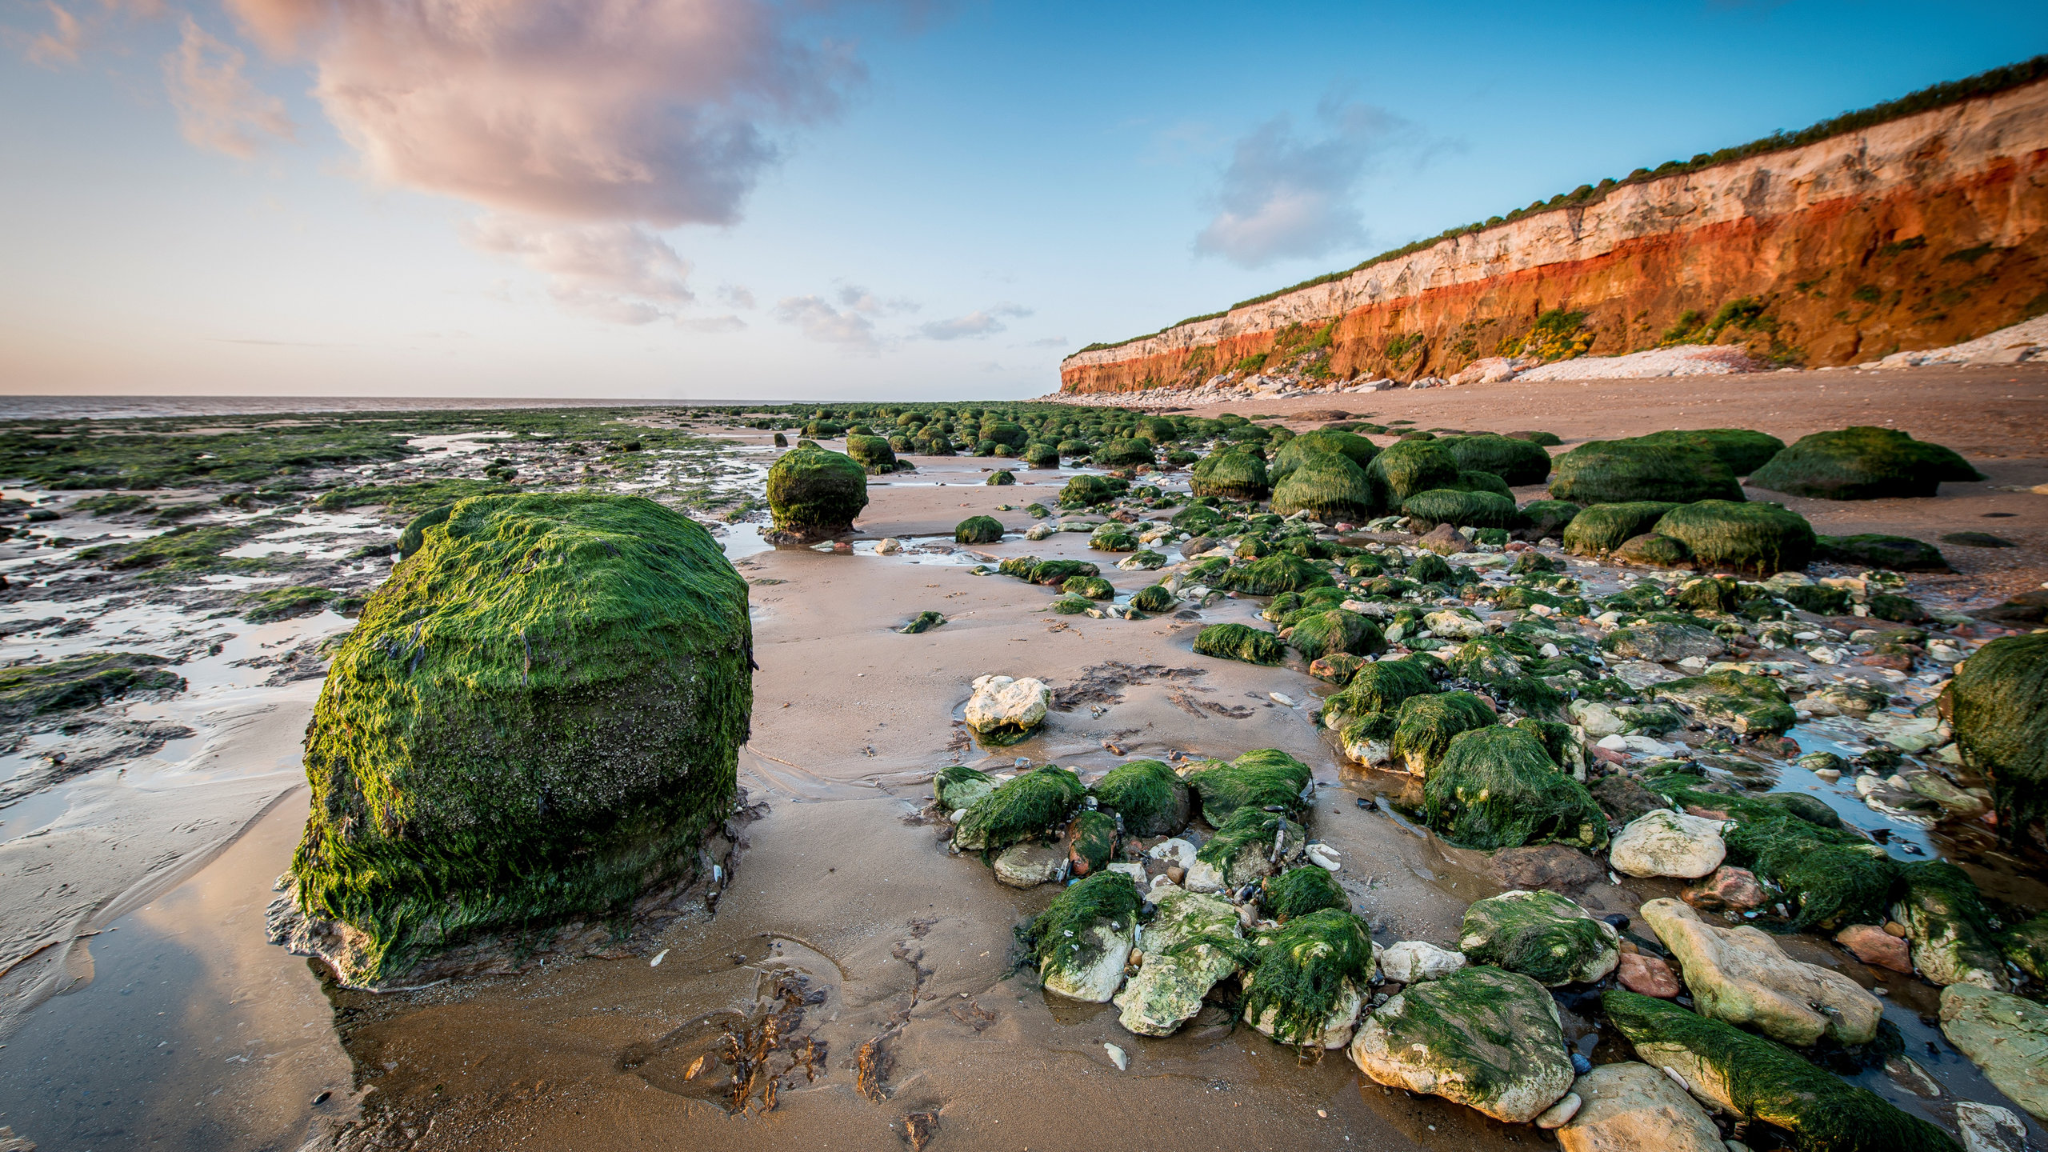 The picturesque landscape of the Norfolk beach makes it an ideal destination for photo lovers. A massive beach with diverse landscapes